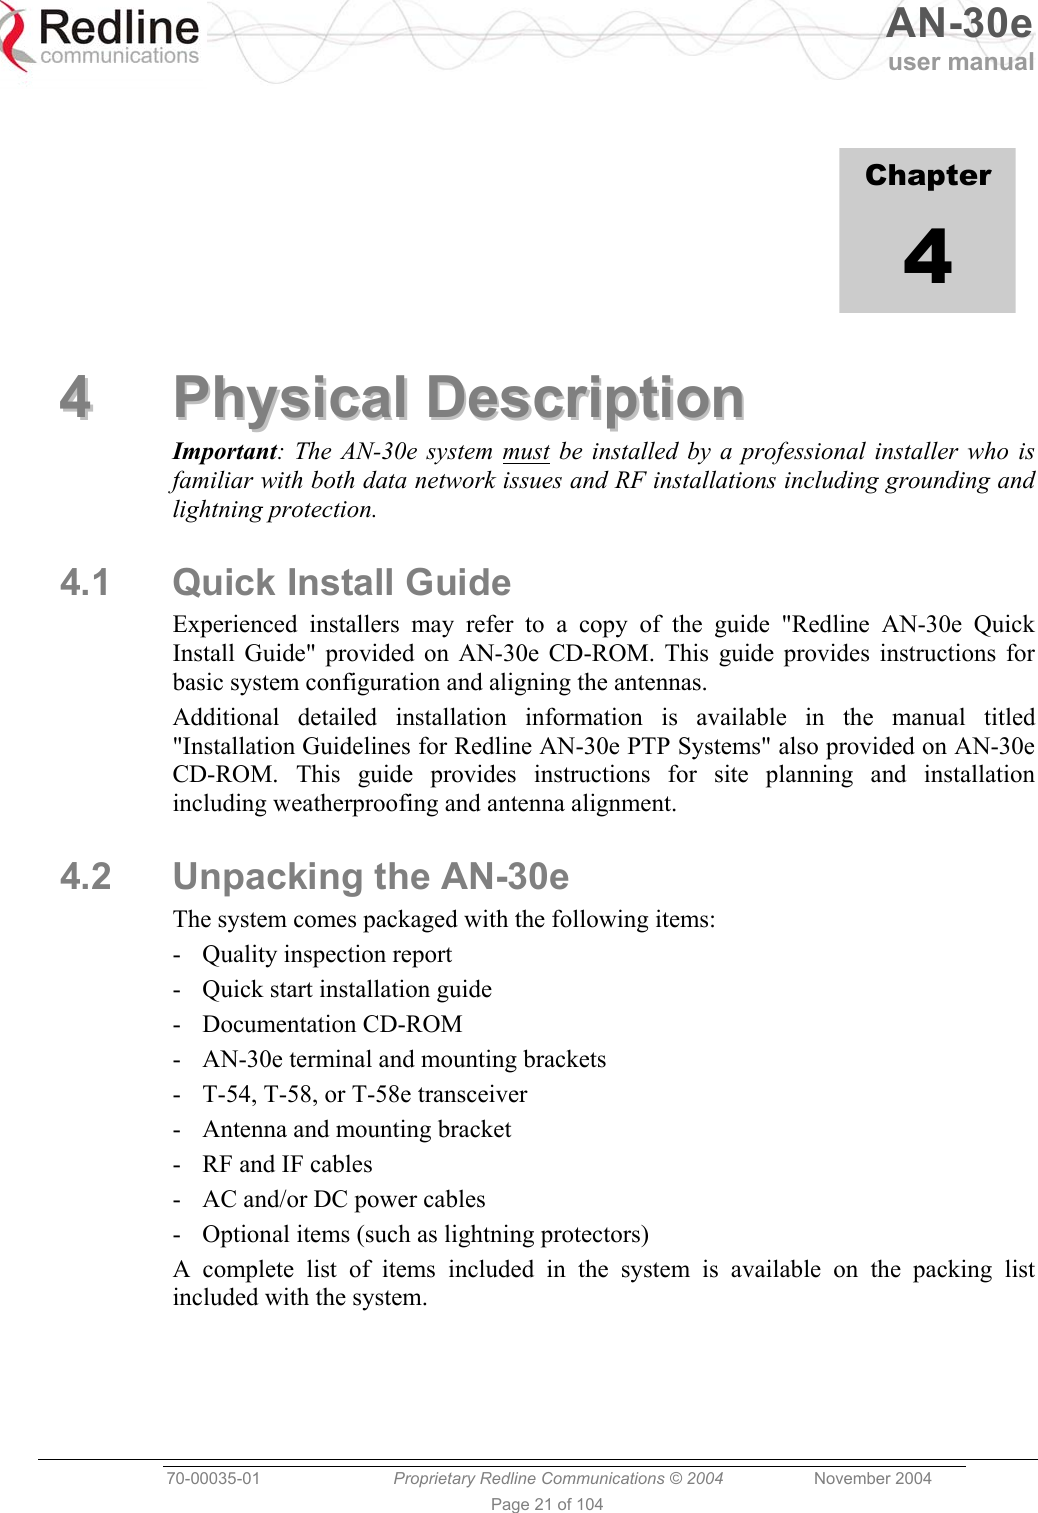   AN-30e user manual  70-00035-01  Proprietary Redline Communications © 2004 November 2004   Page 21 of 104            Chapter 4 44  PPhhyyssiiccaall  DDeessccrriippttiioonn  Important: The AN-30e system must be installed by a professional installer who is familiar with both data network issues and RF installations including grounding and lightning protection. 4.1 Quick Install Guide Experienced installers may refer to a copy of the guide &quot;Redline AN-30e Quick Install Guide&quot; provided on AN-30e CD-ROM. This guide provides instructions for basic system configuration and aligning the antennas. Additional detailed installation information is available in the manual titled &quot;Installation Guidelines for Redline AN-30e PTP Systems&quot; also provided on AN-30e CD-ROM. This guide provides instructions for site planning and installation including weatherproofing and antenna alignment. 4.2  Unpacking the AN-30e The system comes packaged with the following items: -  Quality inspection report -  Quick start installation guide - Documentation CD-ROM -  AN-30e terminal and mounting brackets -  T-54, T-58, or T-58e transceiver -  Antenna and mounting bracket -  RF and IF cables -  AC and/or DC power cables -  Optional items (such as lightning protectors) A complete list of items included in the system is available on the packing list included with the system. 